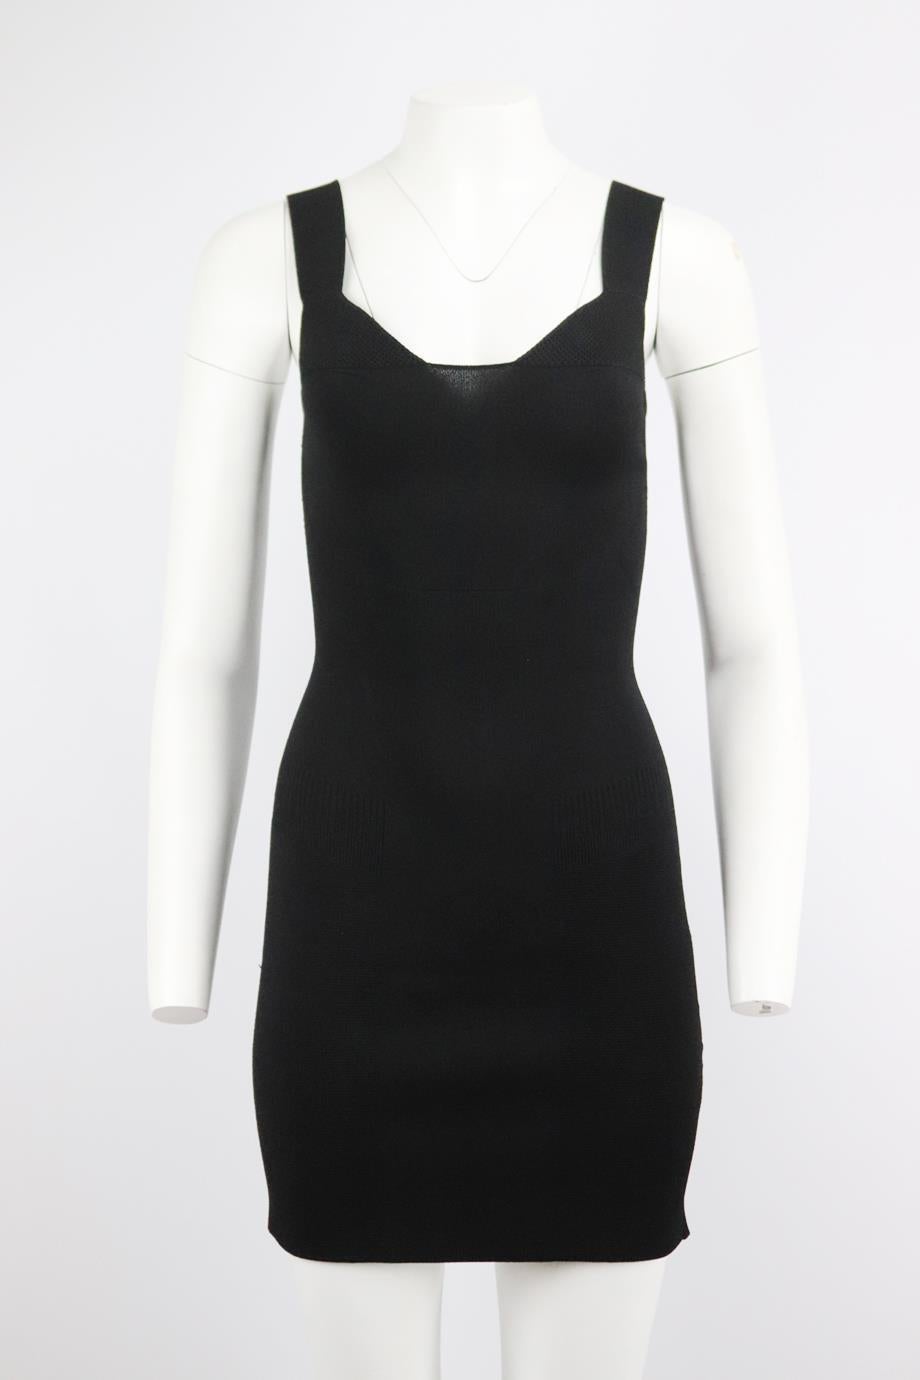 AZ Factory stretch knit mini dress. Black. Sleeveless, v-neck. Zip fastening at back. 67% Viscose, 16% polyamide, 14% polyester, 3% lycra. Size: Small (UK 8, US 4, FR 36, IT 40). Bust: 25 in. Waist: 21 in. Hips: 31 in. Length: 32 in. Very good